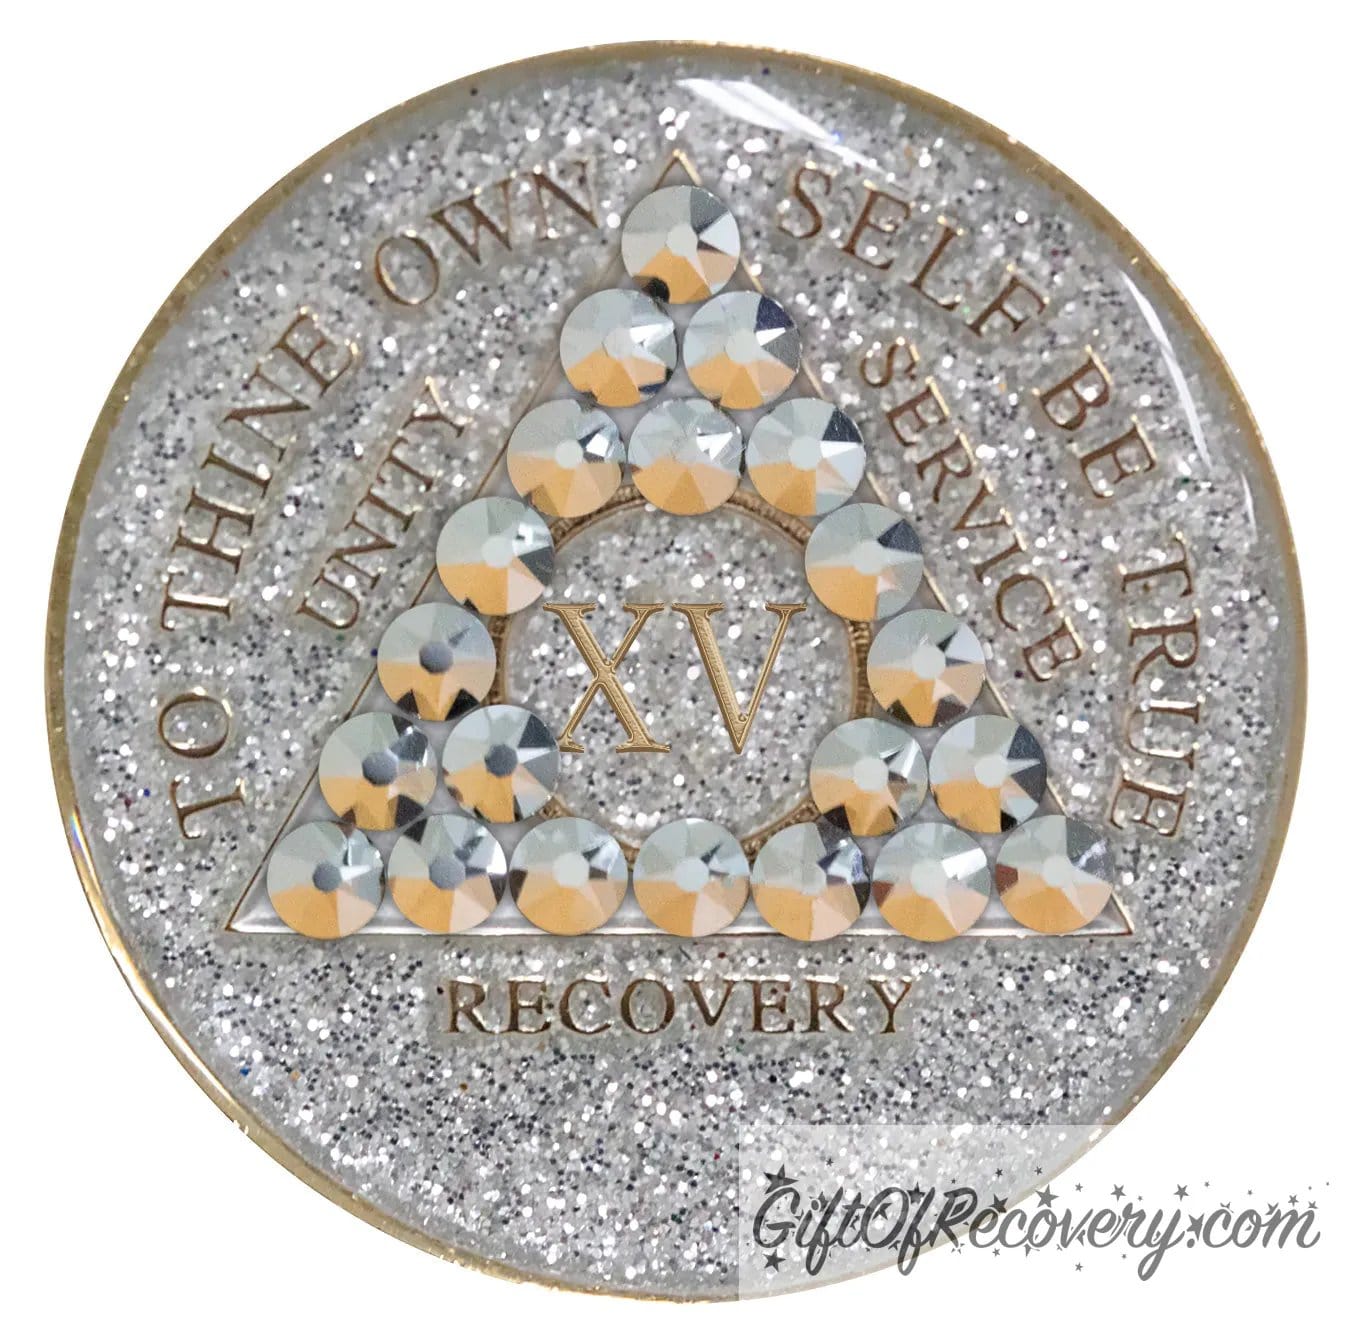 15 year silver glitter AA medallion with 21 genuine comet crystals, forming a triangle around the 1 year, while the year, unity, service, recovery, rim, and To Thine Own Self Be True are embossed in 14k gold, sealed with resin to give it a glossy finish, hand painted and scratch resistant.